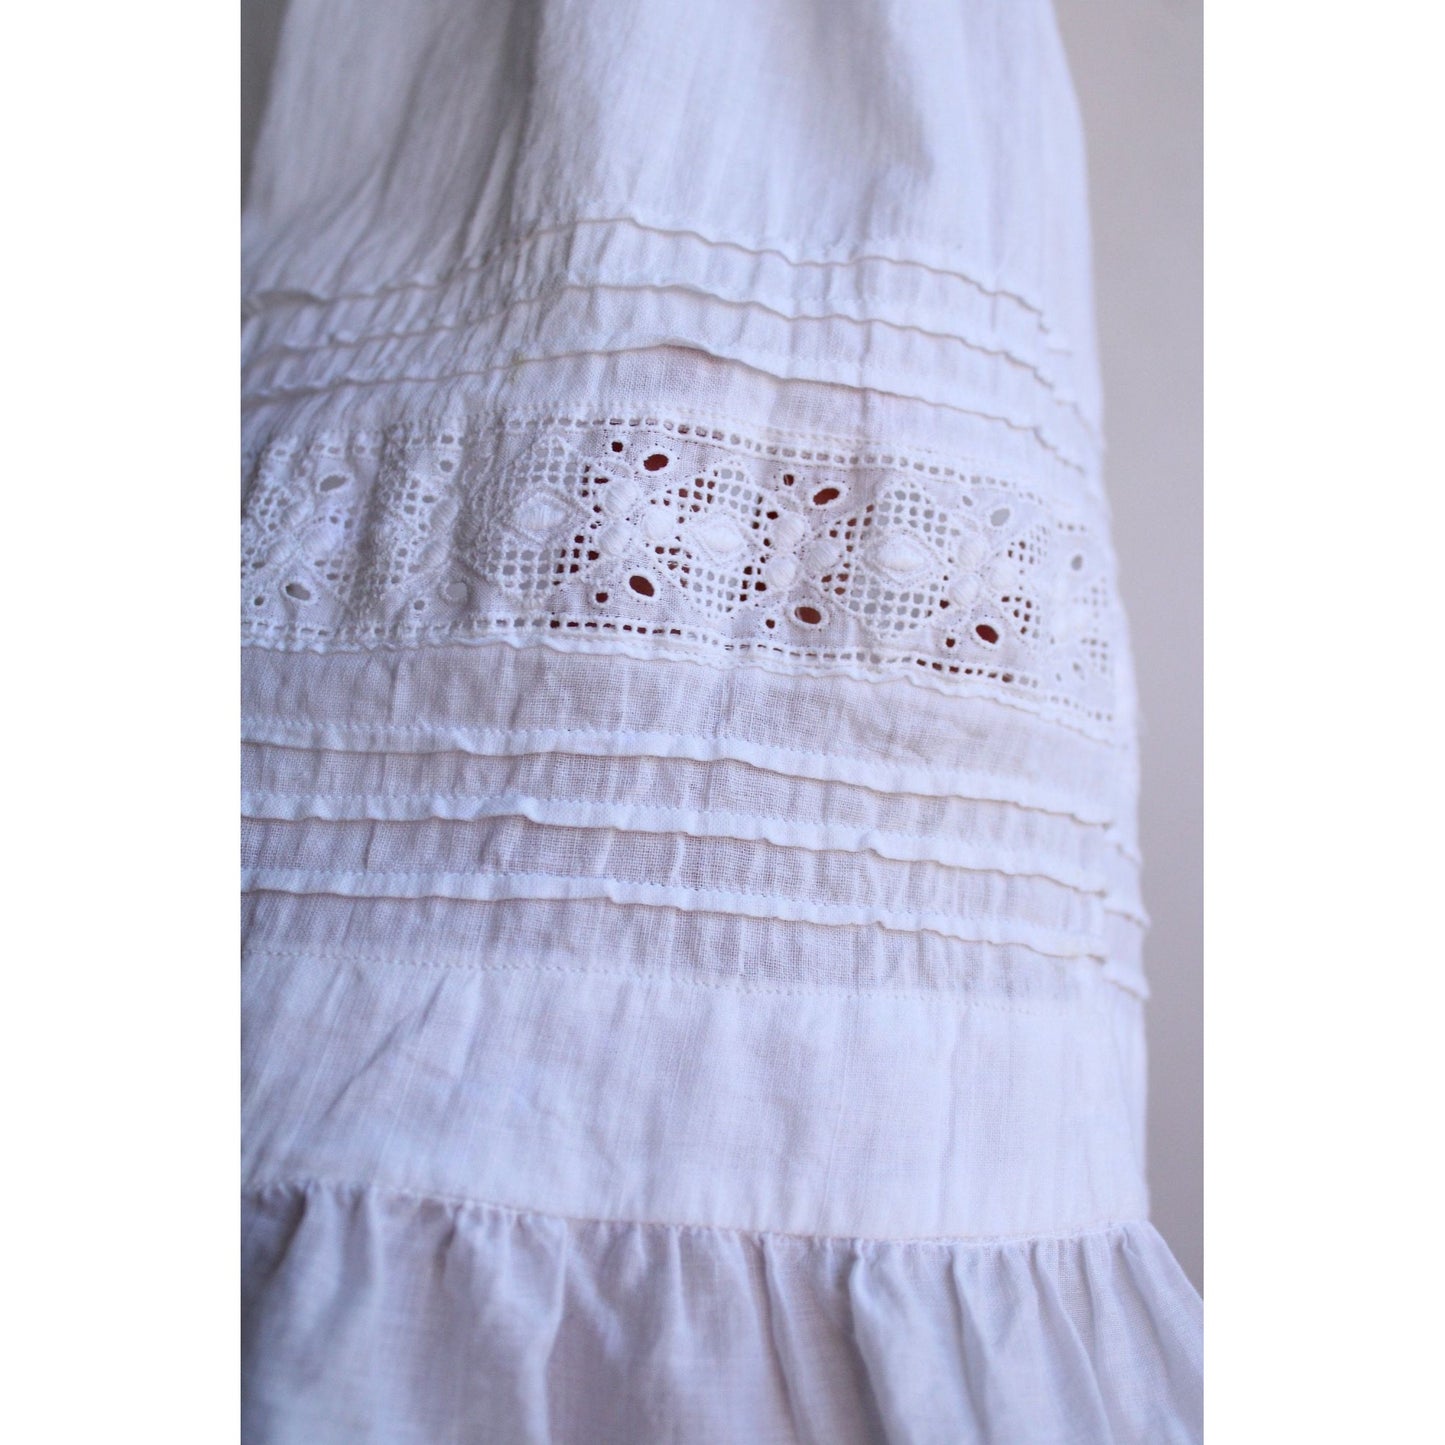 Vintage 1910s White Cotton and Lace Christening Baptism Baby Dress